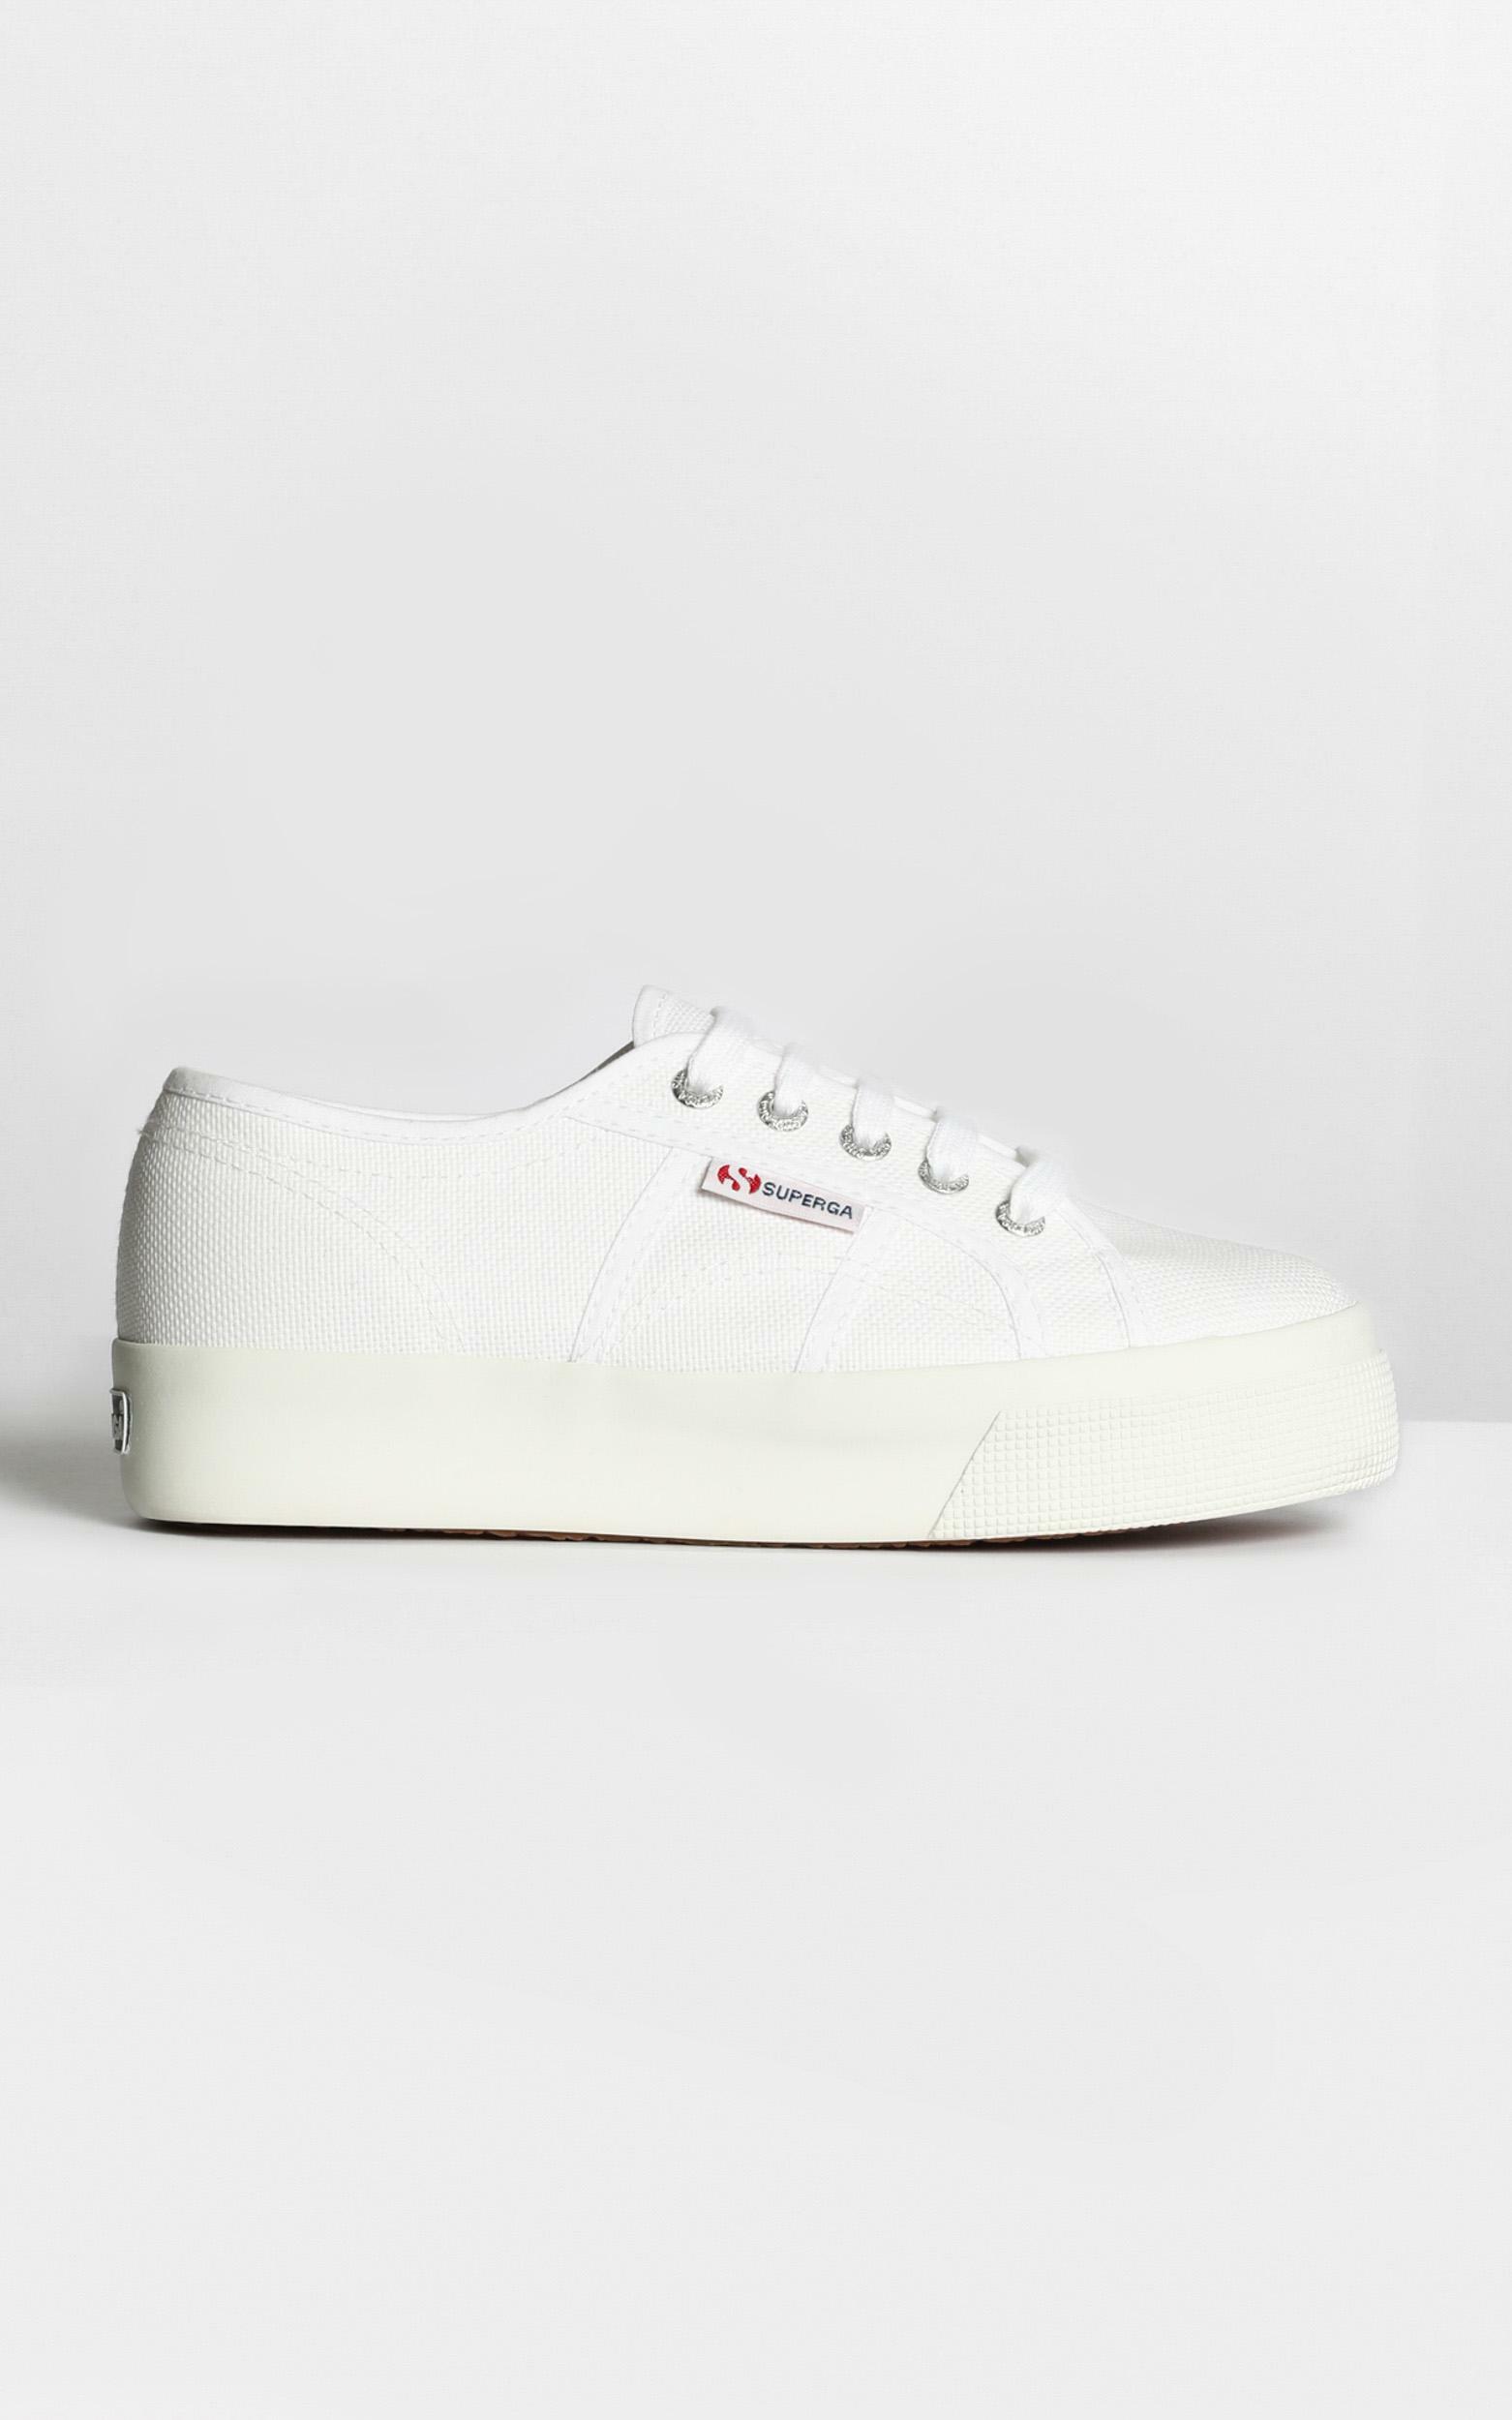 Superga- 2730 Cotu Sneakers in White Canvas - 06, WHT1, hi-res image number null